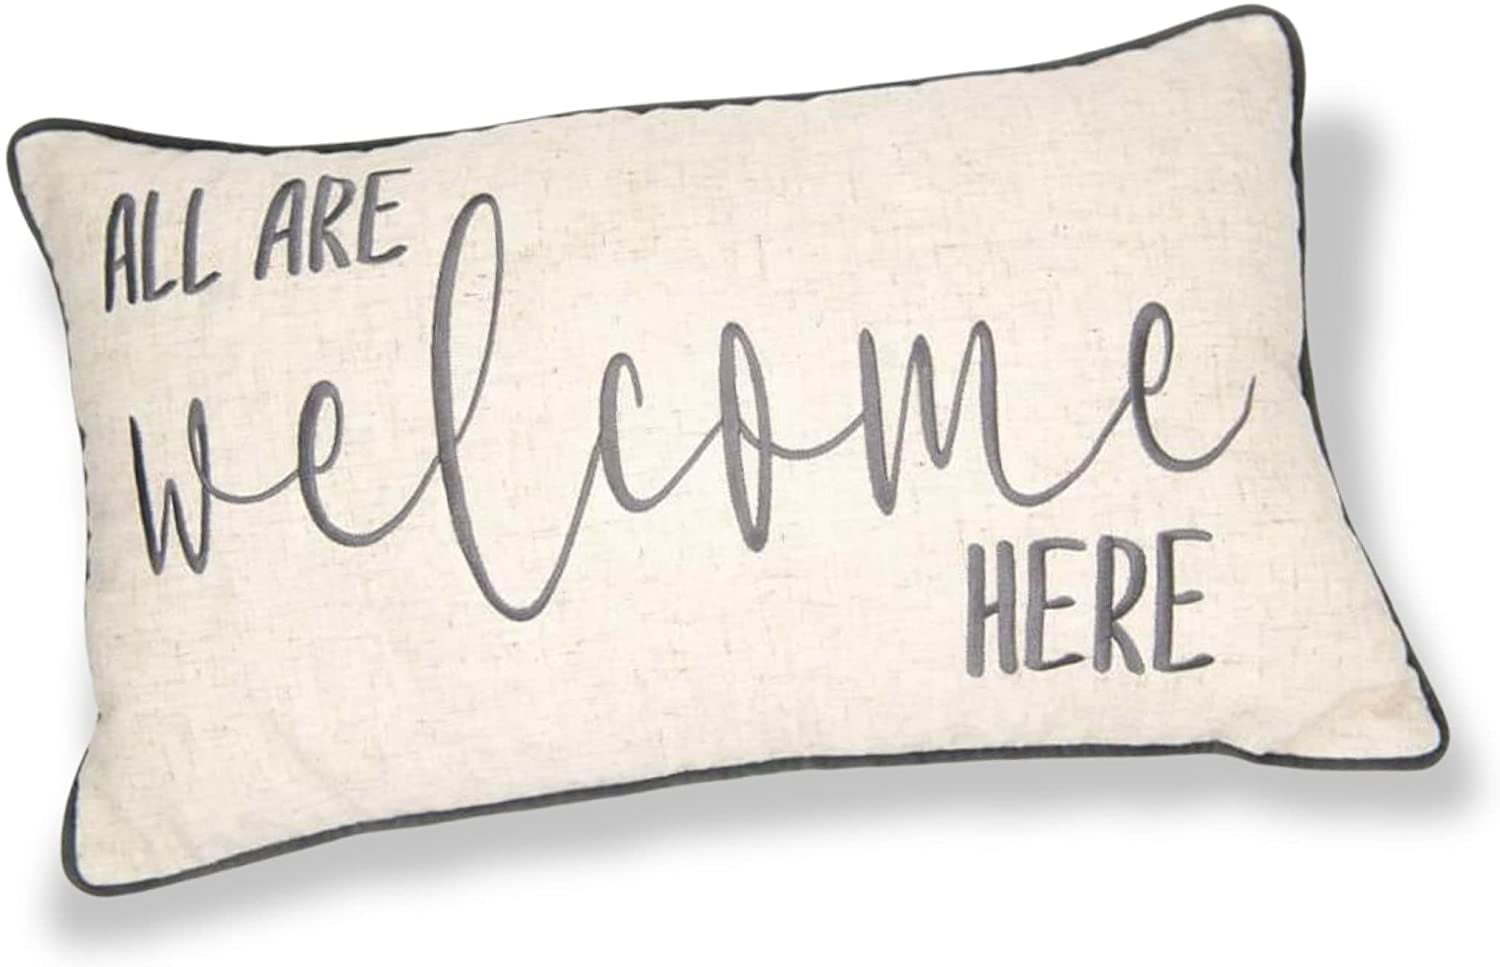 DZGlobal Welcome to Our Porch Pillow Covers 12x20 Set of 2 Our Happy Place Pillow Cases Black Outdoor Lumbar Pillow Covers for Front Porch Decor Farmhouse Patio Furniture